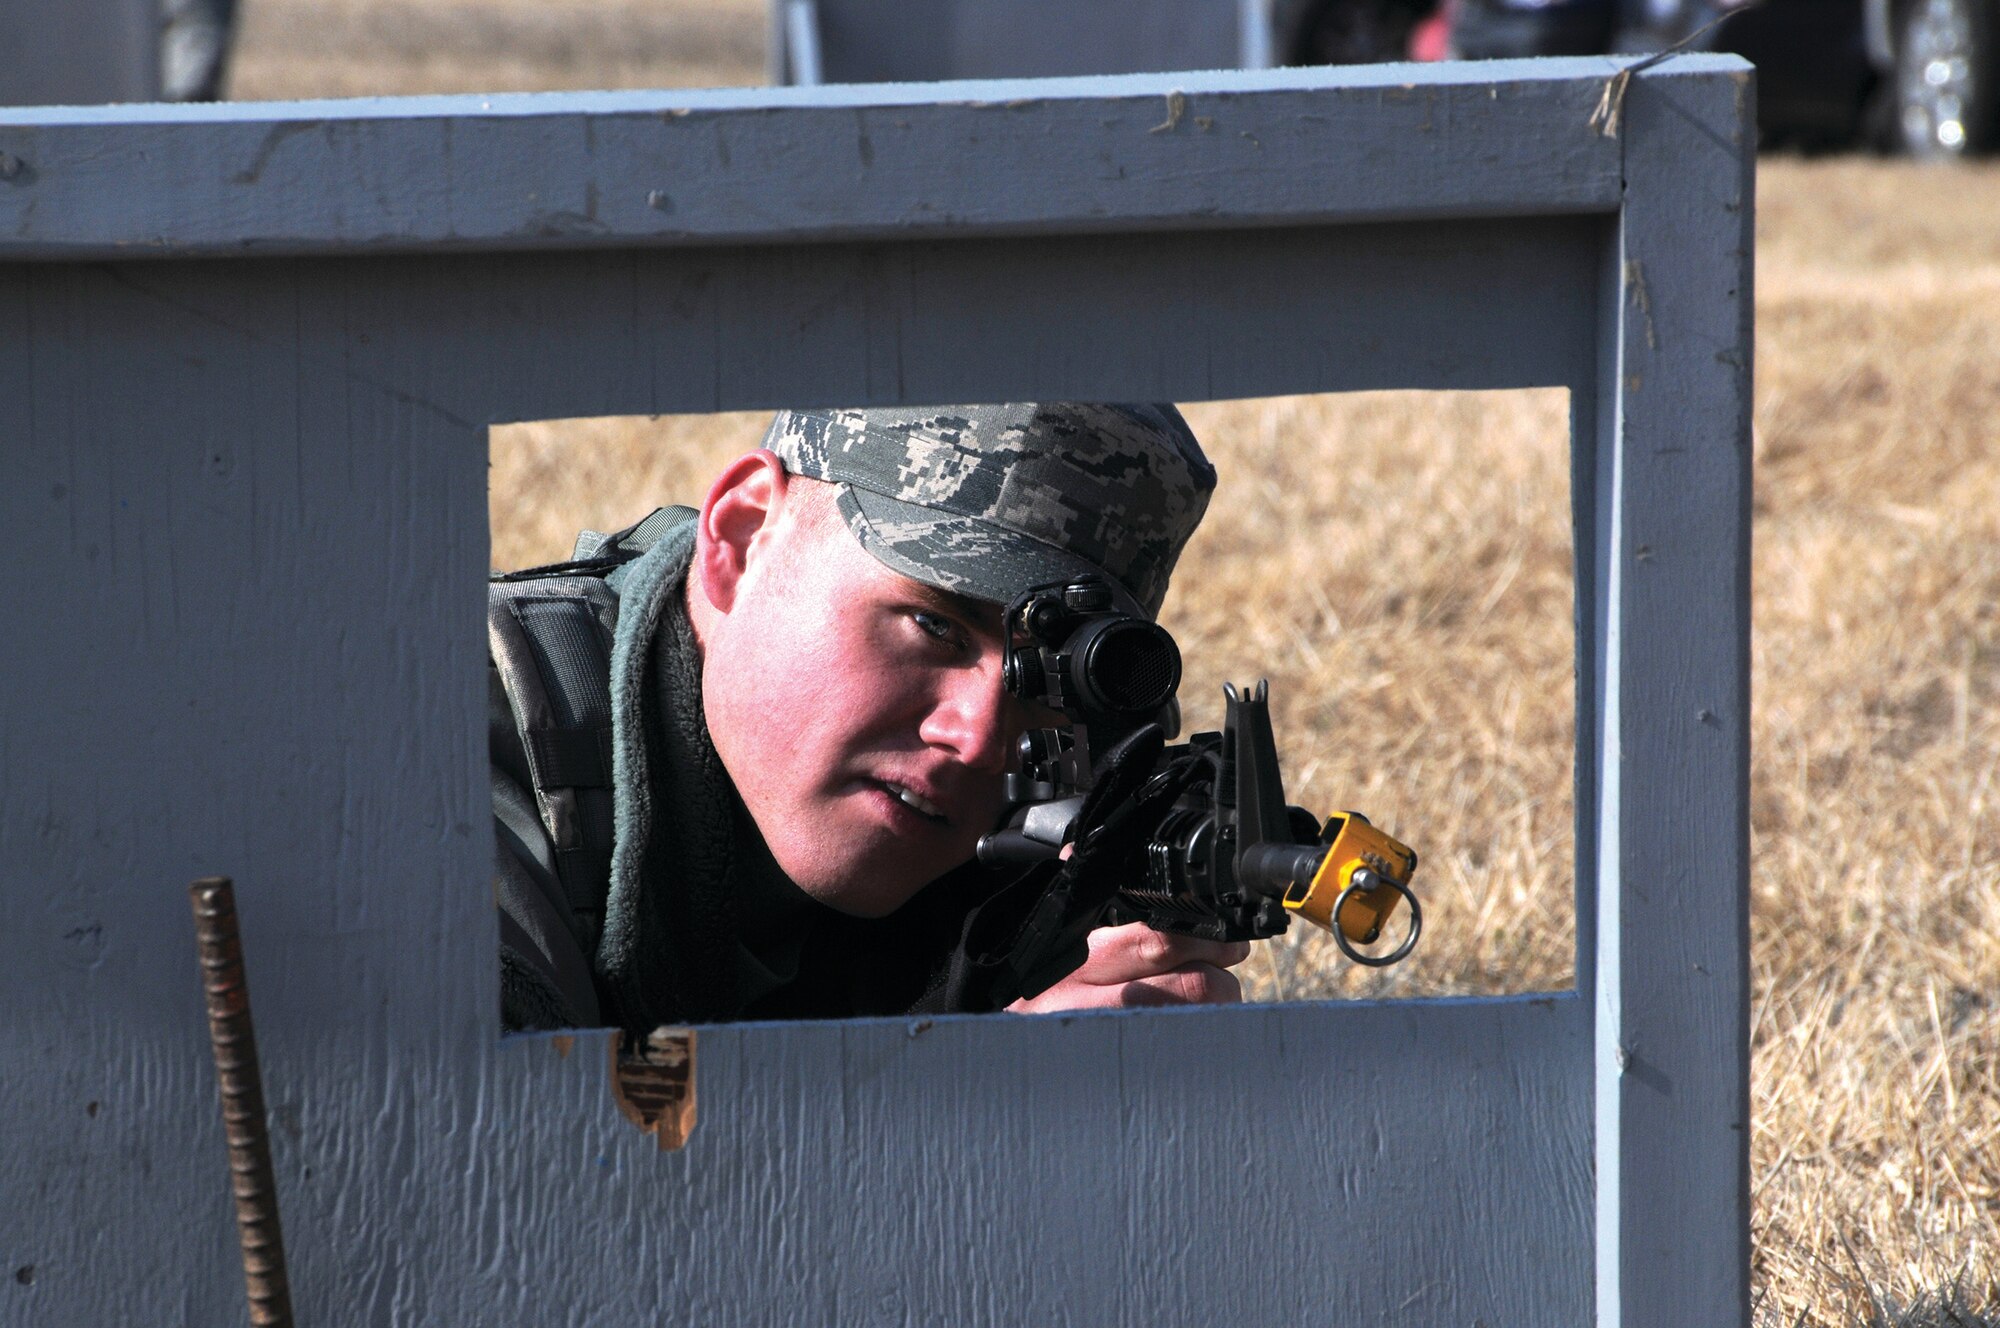 WRIGHT-PATTERSON AIR FORCE BASE, Ohio - Senior Airman Nicholas Livingston, 445th Security Forces Squadron, practices maneuvering techniques during his squadron’s “shoot, move, communicate” training event March 9. (U.S. Air Force photo/Tech. Sgt. Anthony Springer)